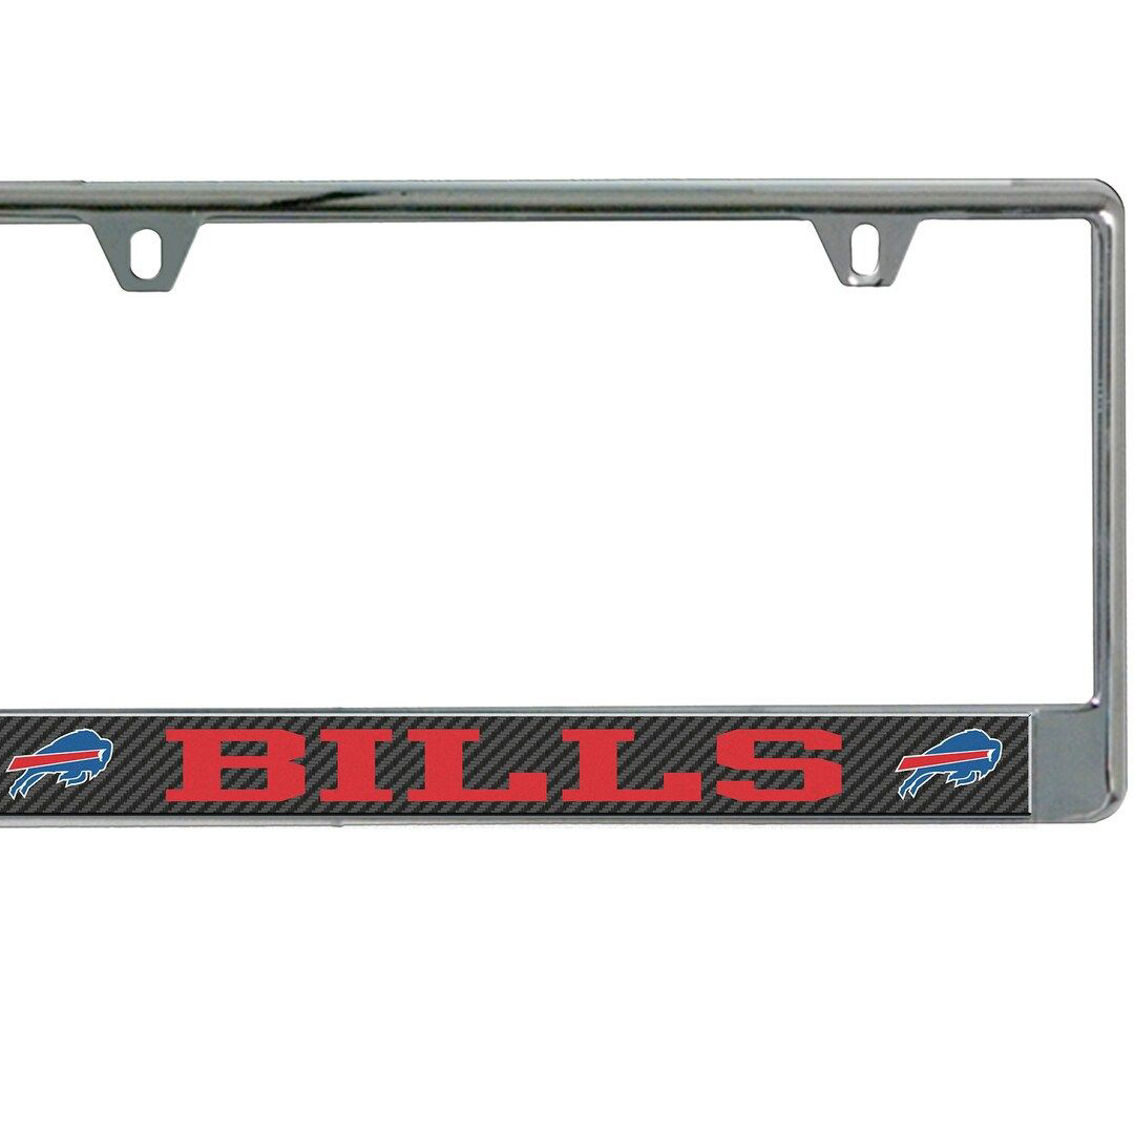 Stockdale Buffalo Bills Carbon Bottom Only Metal Acrylic Cut License Plate Frame - Image 2 of 2